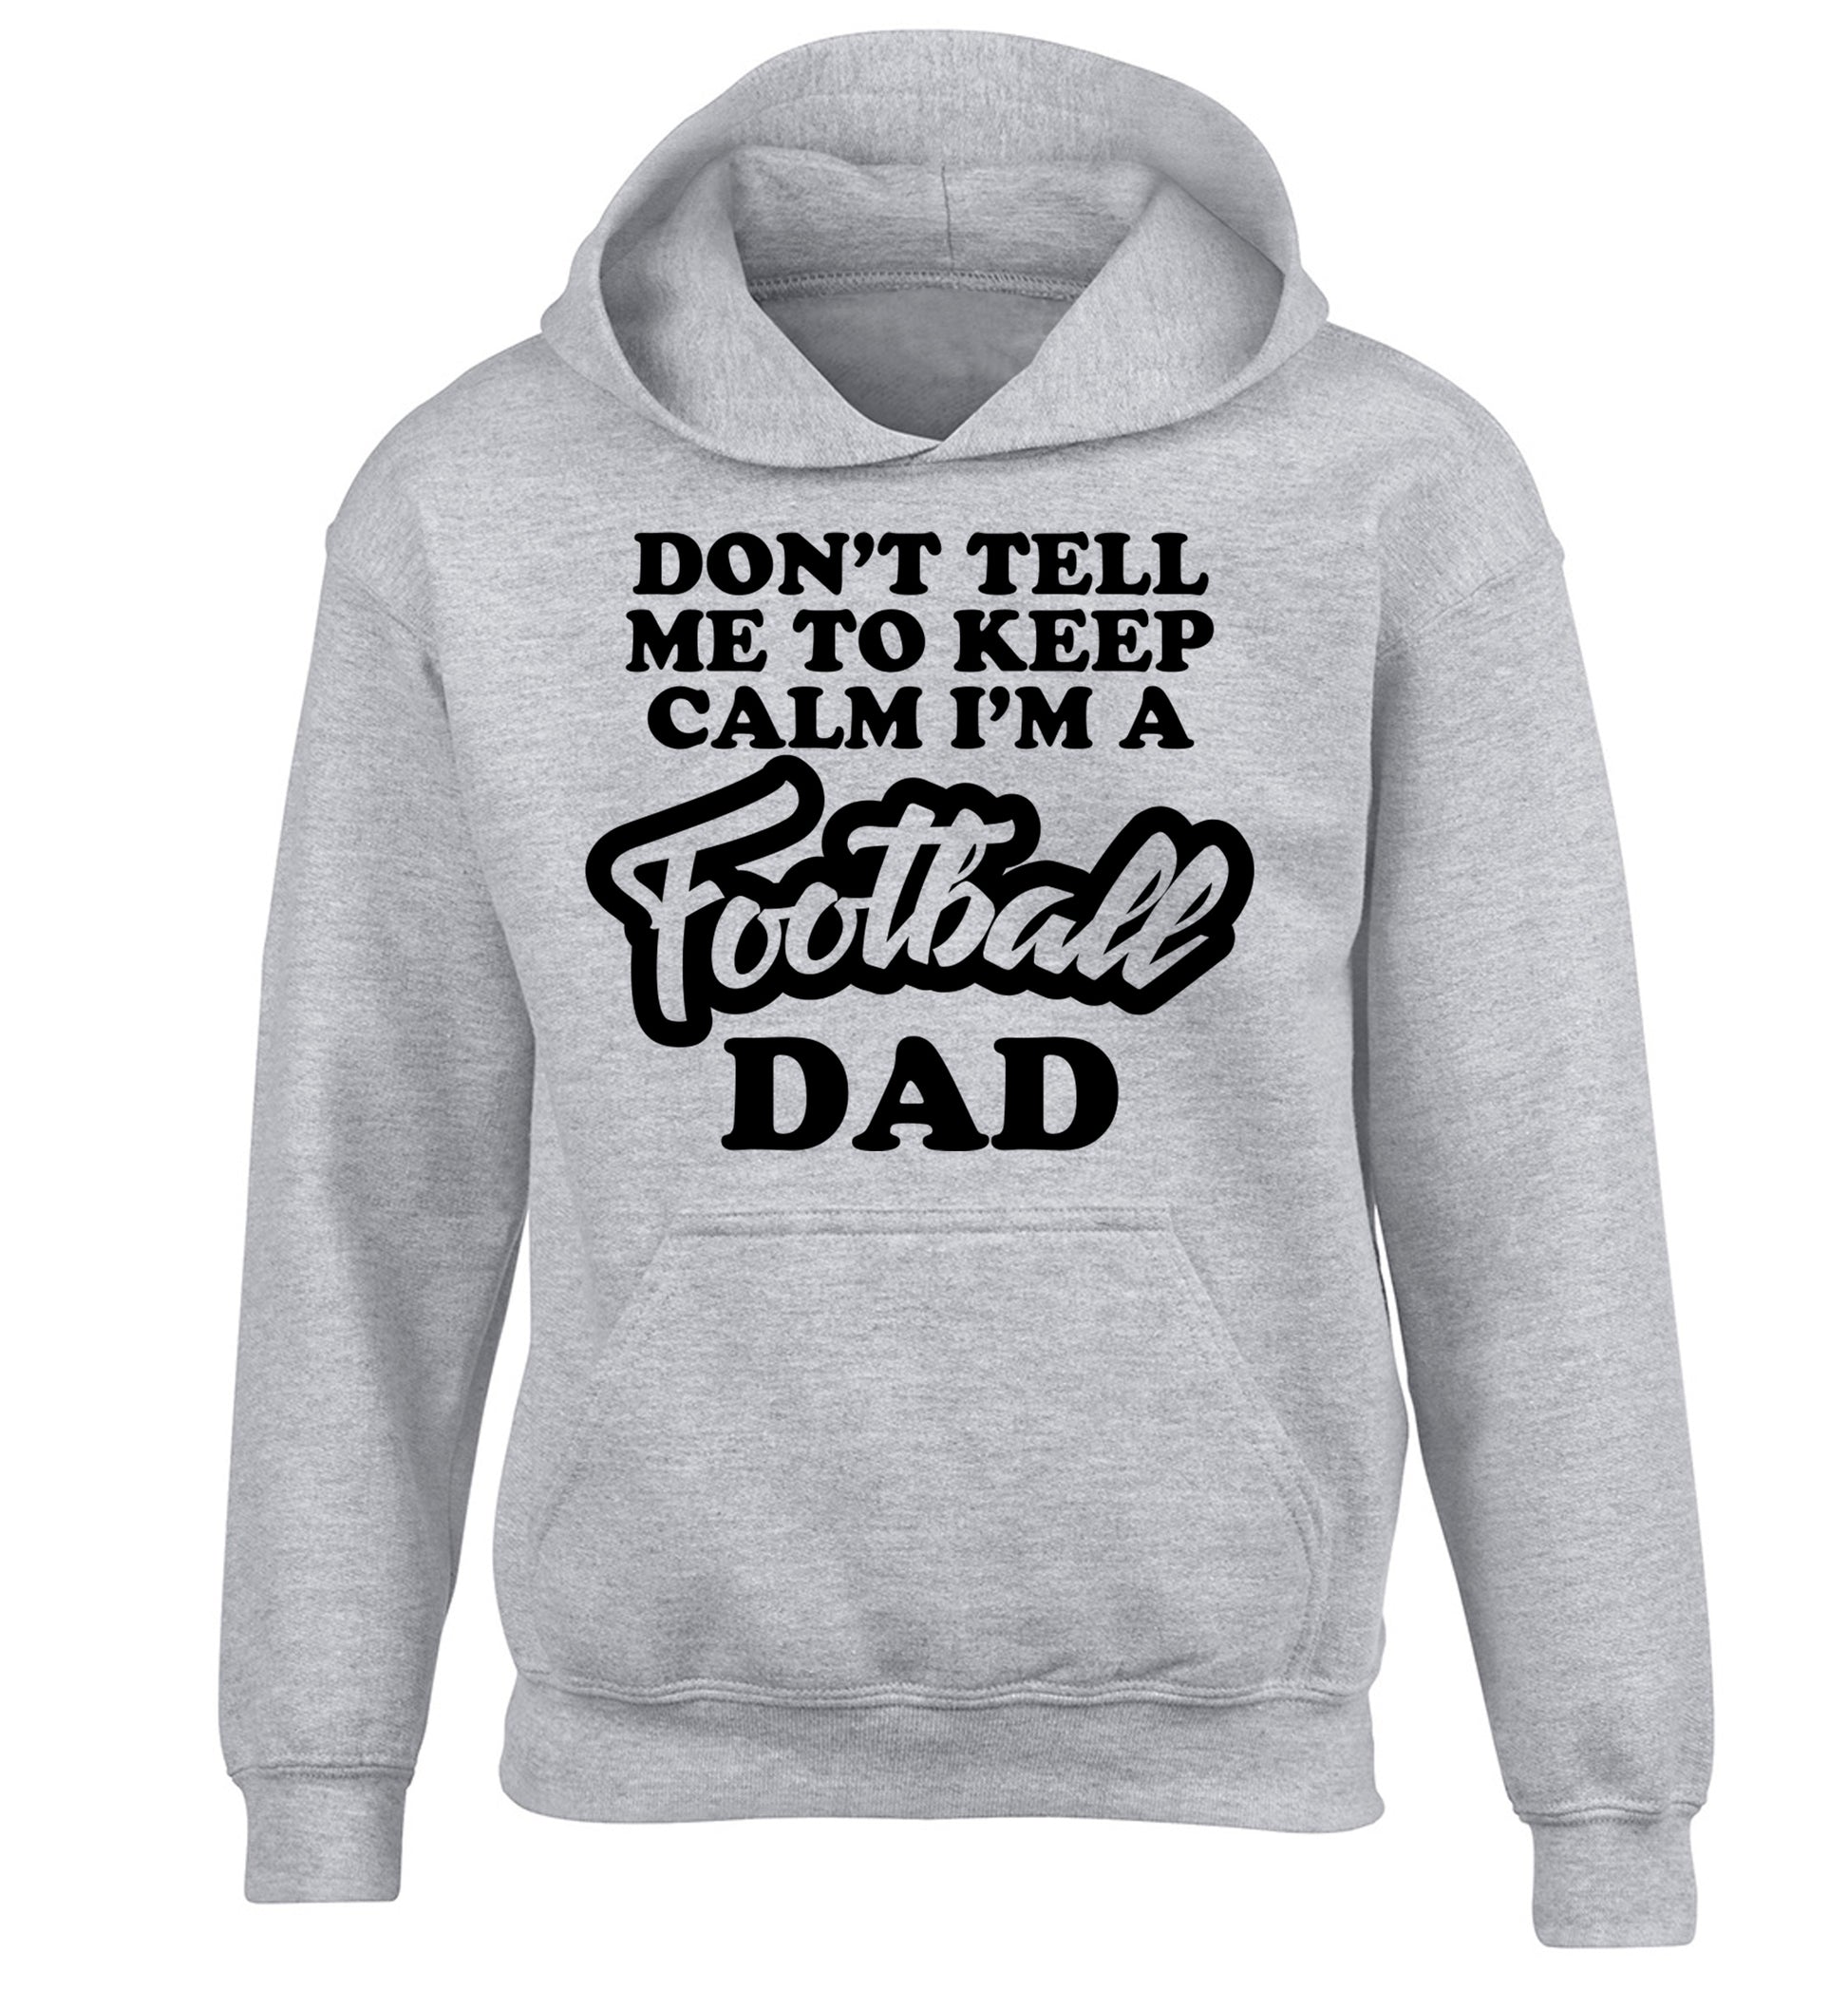 Don't tell me to keep calm I'm a football dad children's grey hoodie 12-14 Years